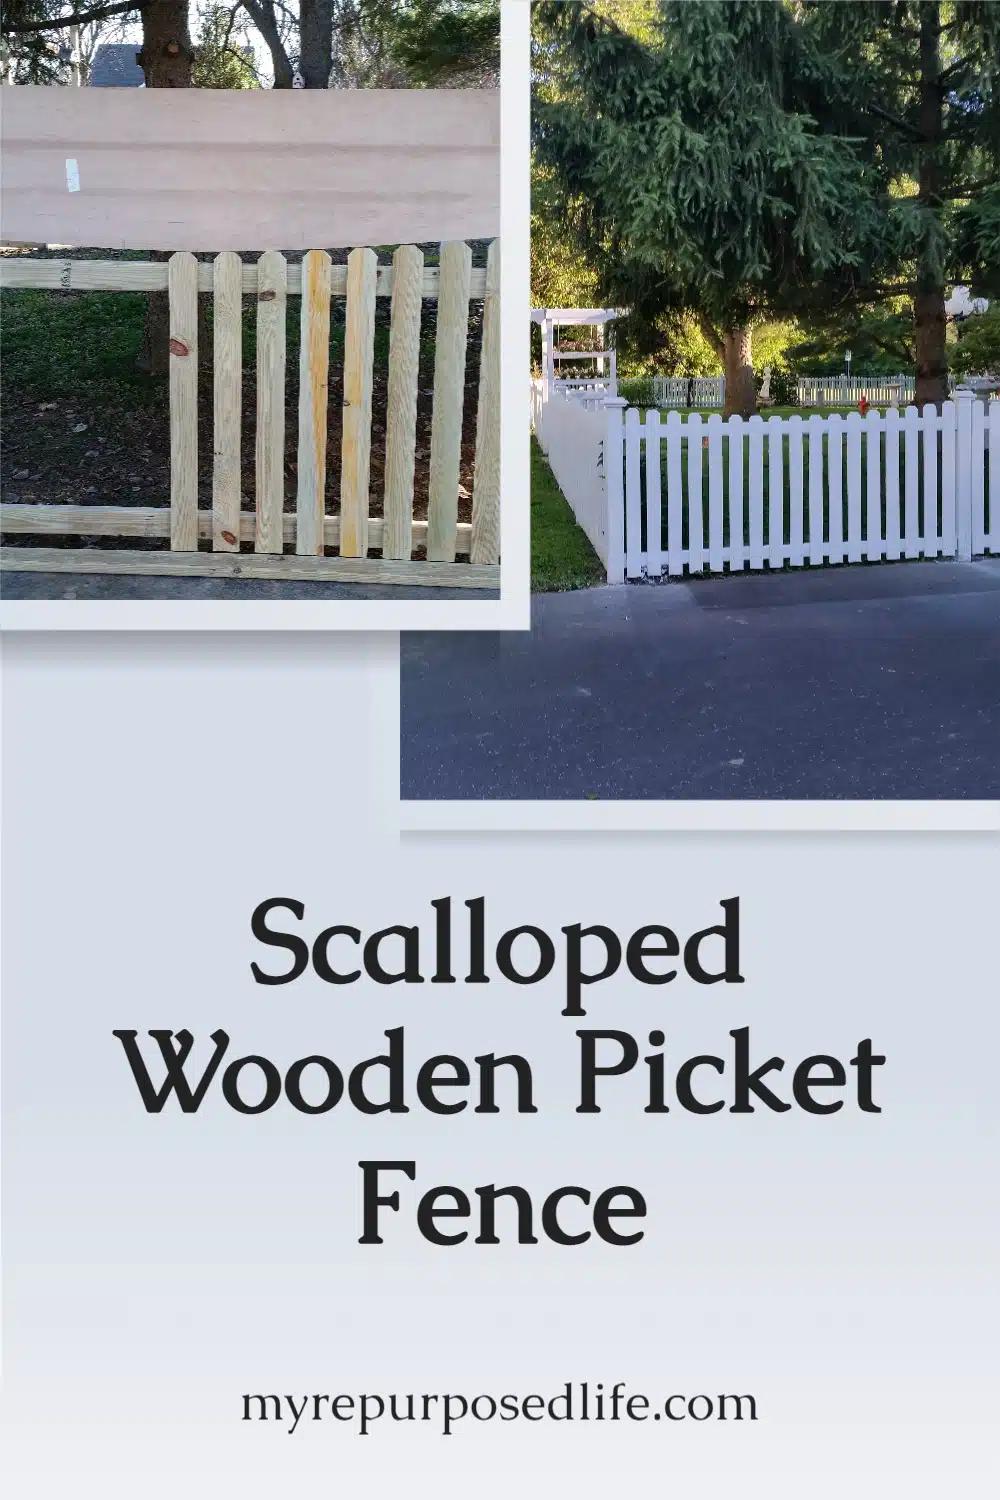 Tips to make your wooden picket fence unlike any of your neighbors. You can do it yourself, or you can share these ideas with your favorite contractor. Spacing of pickets, and height is totally up to your specifications. #diy #picketfence #MyRepurposedLife #woodenfence via @repurposedlife